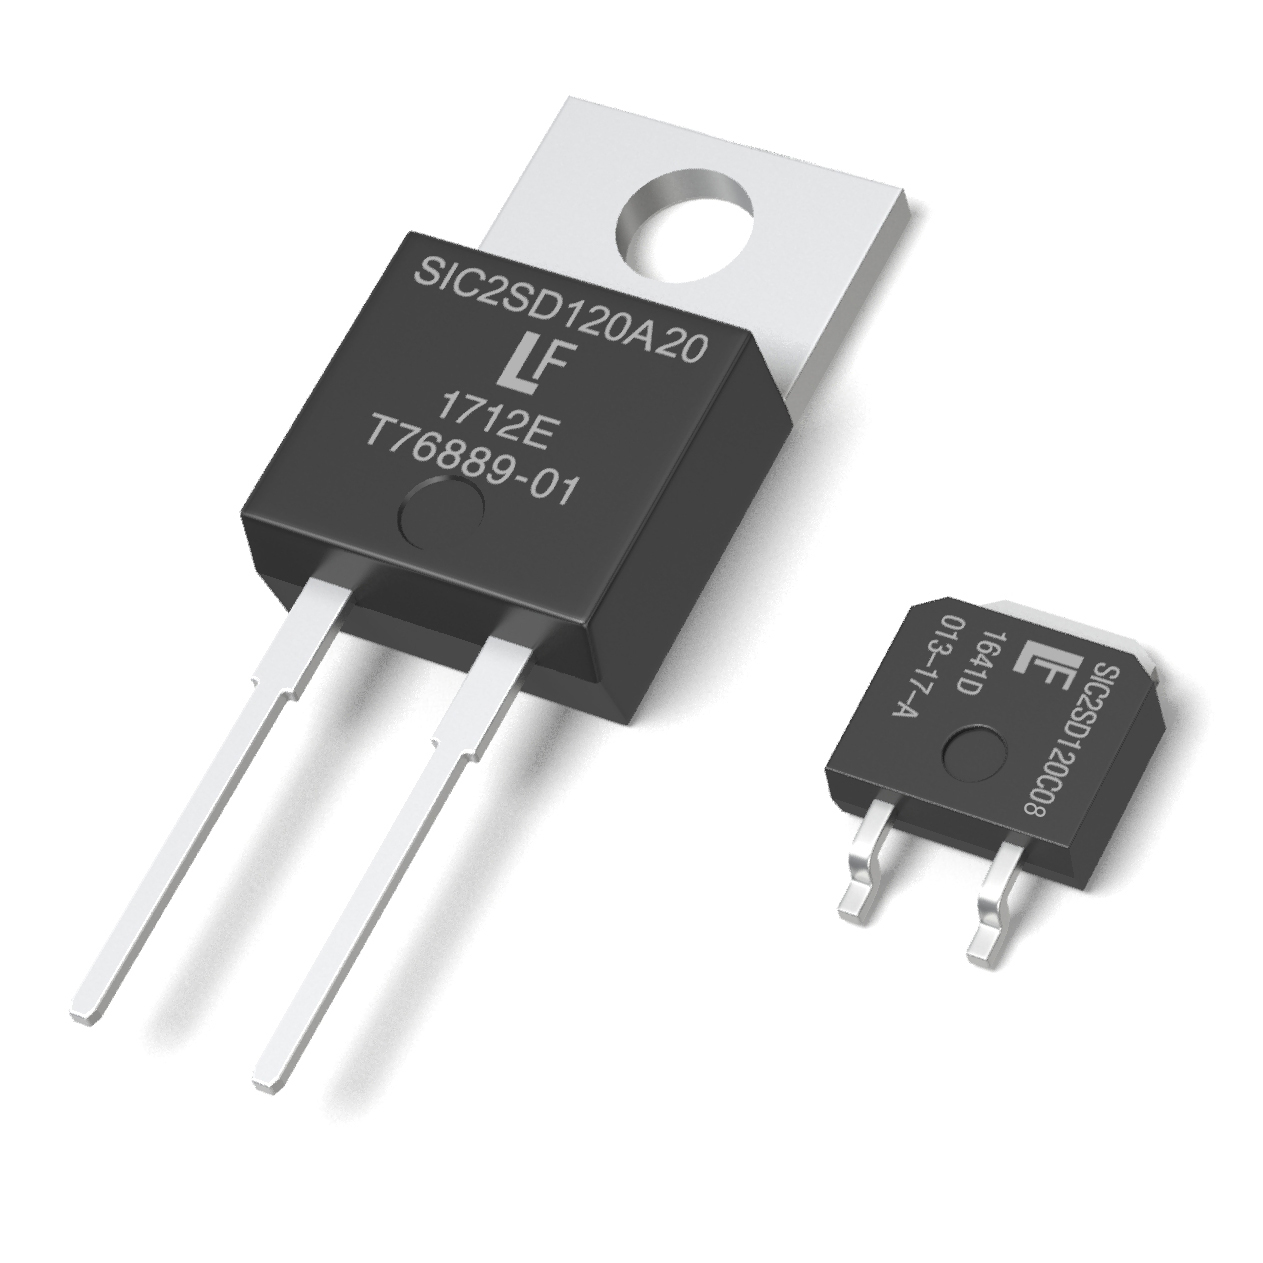 SiC Schottky Diode Line Reduces Switching Losses, Increases Efficiency and Robustness